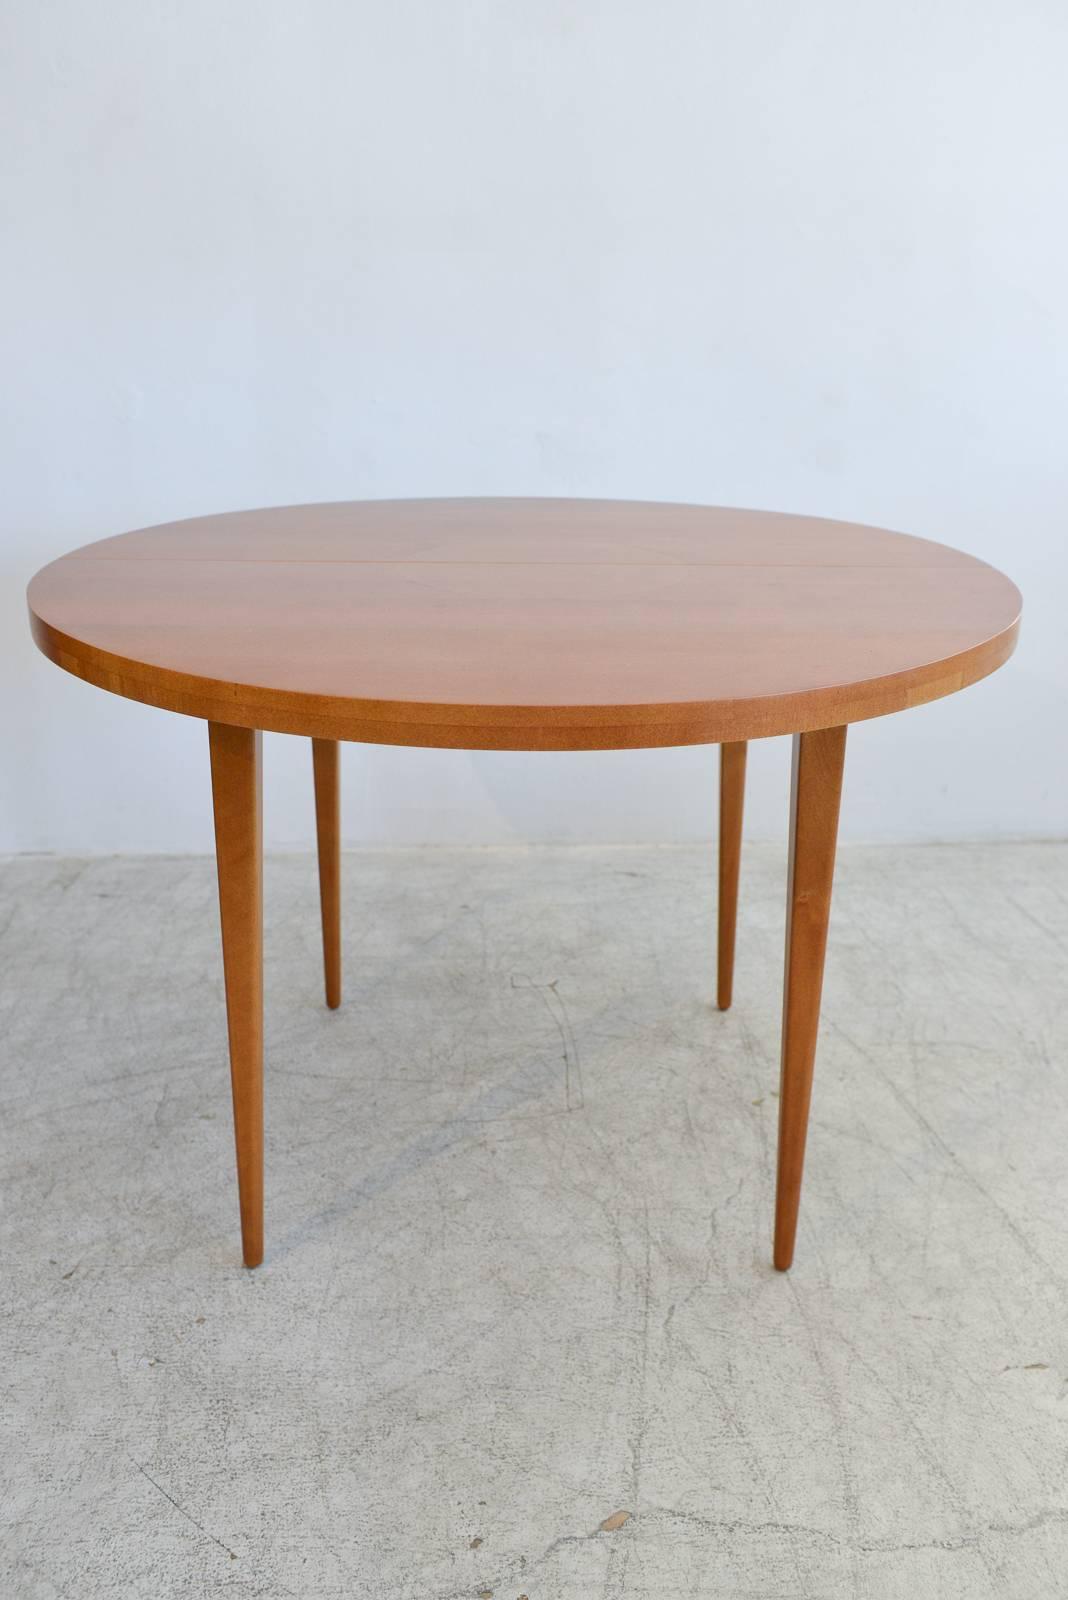 Mid-Century Modern Paul McCobb Round Maple Dining Table with Two Extensions, circa 1955